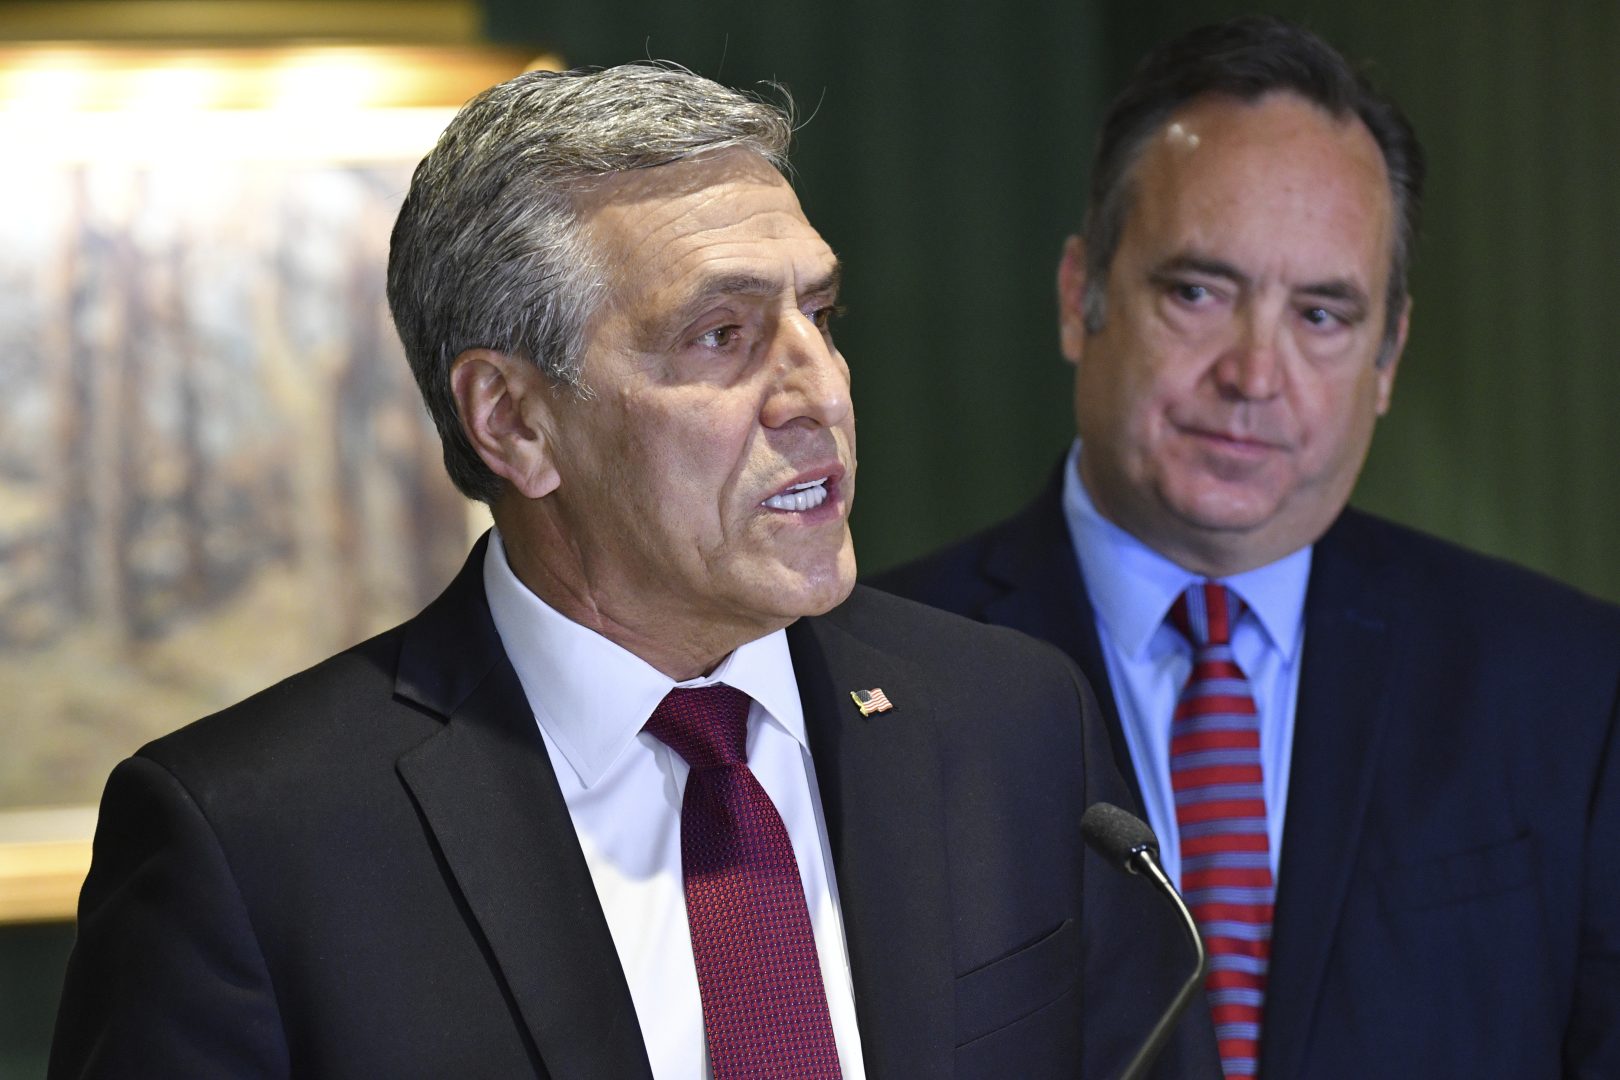 Lou Barletta speaks at a news conference where he accepted the endorsement of a rival in Pennsylvania's crowded Republican primary for governor, Jake Corman, right, May 12, 2022, in Harrisburg, Pa. Corman's endorsement comes as GOP leaders warn that leading Republican primary candidate Doug Mastriano is too far right to win in a general election.